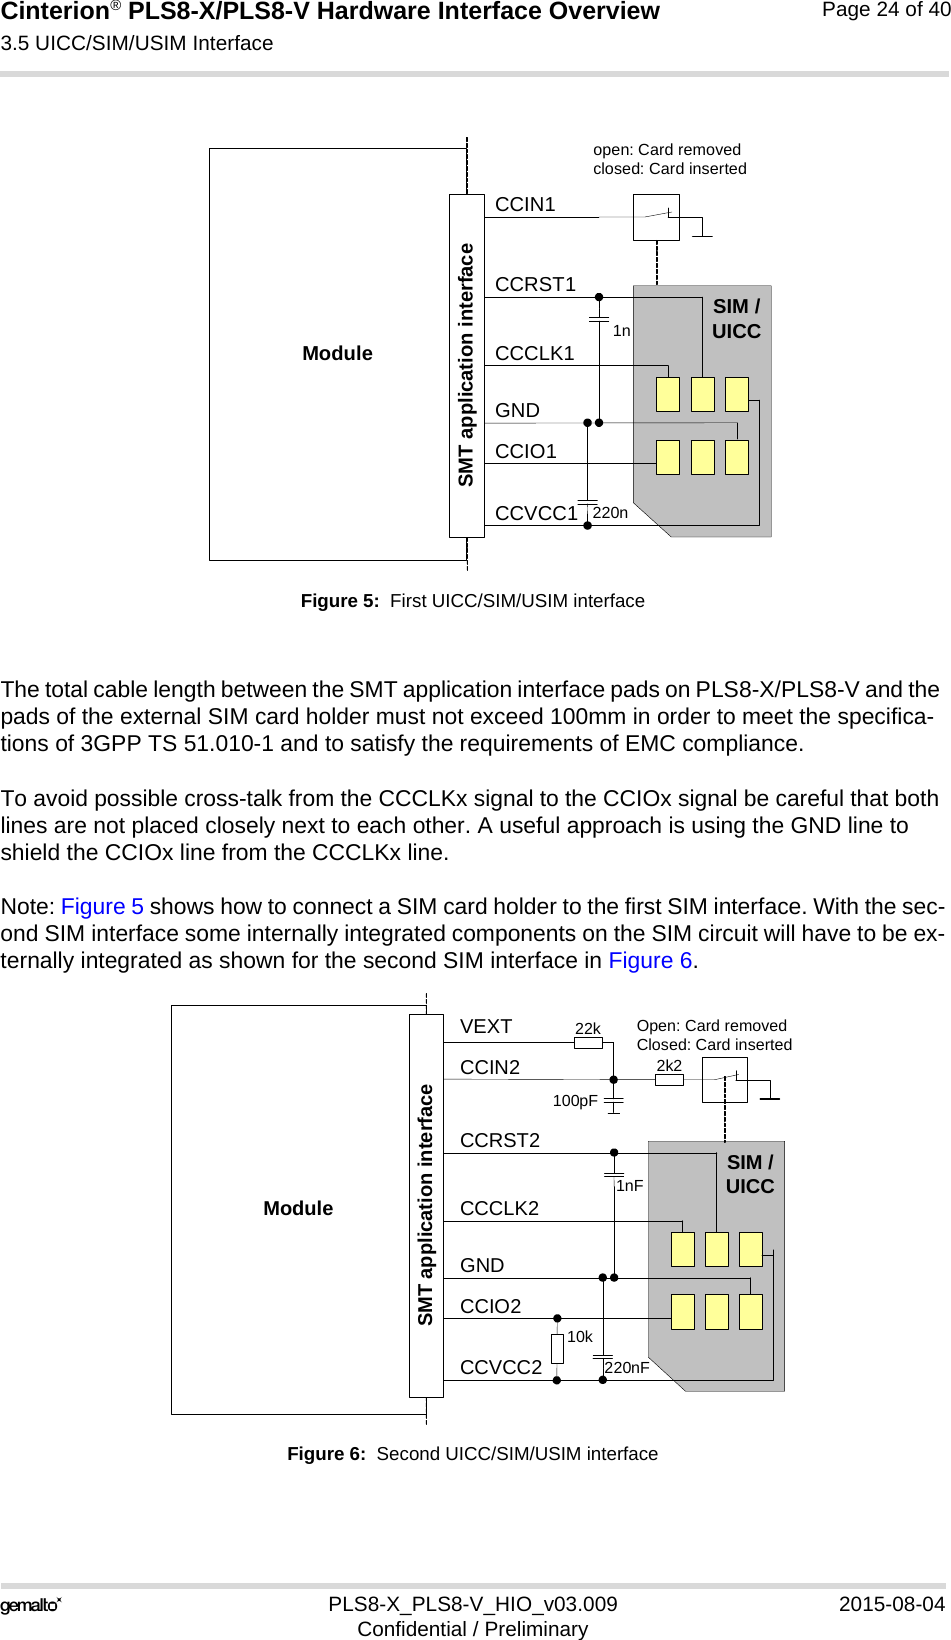 Cinterion® PLS8-X/PLS8-V Hardware Interface Overview3.5 UICC/SIM/USIM Interface26PLS8-X_PLS8-V_HIO_v03.009 2015-08-04Confidential / PreliminaryPage 24 of 40Figure 5:  First UICC/SIM/USIM interfaceThe total cable length between the SMT application interface pads on PLS8-X/PLS8-V and the pads of the external SIM card holder must not exceed 100mm in order to meet the specifica-tions of 3GPP TS 51.010-1 and to satisfy the requirements of EMC compliance.To avoid possible cross-talk from the CCCLKx signal to the CCIOx signal be careful that both lines are not placed closely next to each other. A useful approach is using the GND line to shield the CCIOx line from the CCCLKx line.Note: Figure 5 shows how to connect a SIM card holder to the first SIM interface. With the sec-ond SIM interface some internally integrated components on the SIM circuit will have to be ex-ternally integrated as shown for the second SIM interface in Figure 6.Figure 6:  Second UICC/SIM/USIM interfaceModuleopen: Card removedclosed: Card insertedCCRST1CCVCC1CCIO1CCCLK1CCIN1SIM /UICC1n220nSMT application interfaceGNDModuleOpen: Card removedClosed: Card insertedCCRST2CCVCC2CCIO2CCCLK2CCIN2SIM /UICC1nF220nFSMT application interfaceGNDVEXT100pF22k2k210k